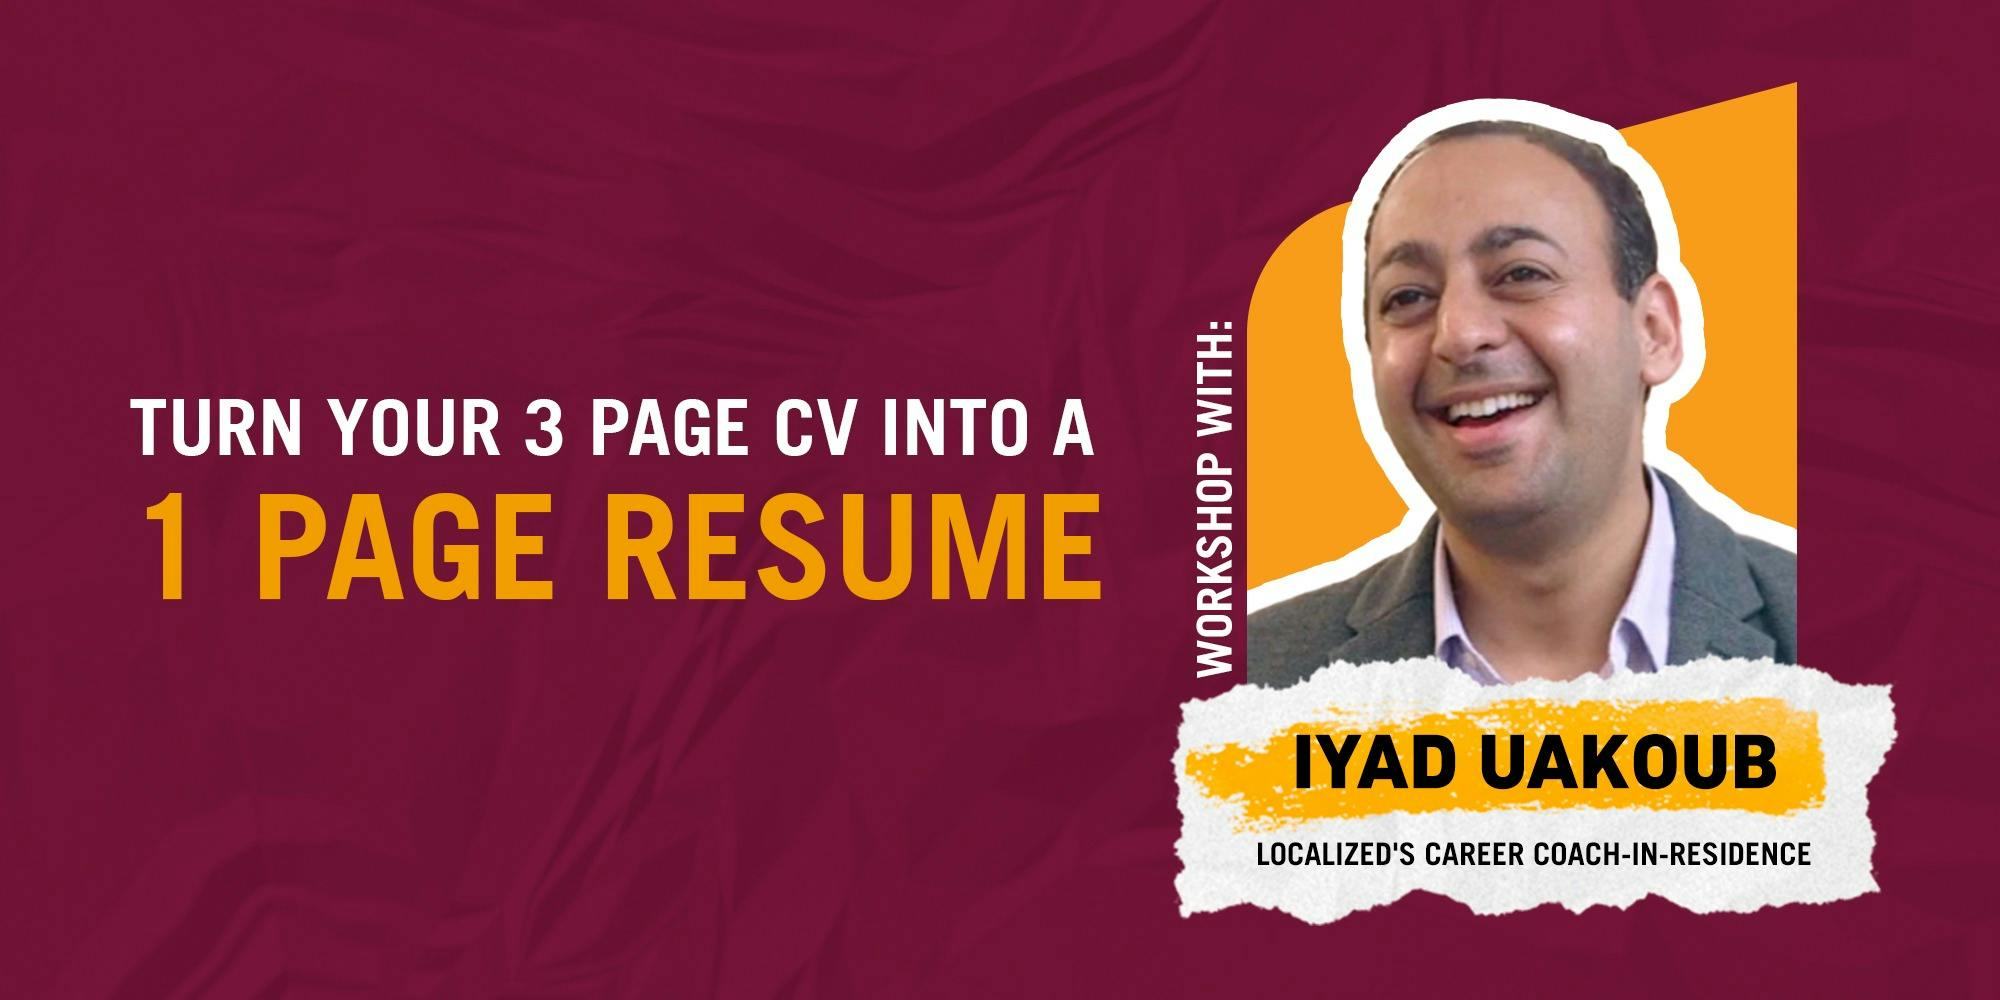 Workshop: How to Turn Your 3 Page CV Into a 1 Page Resume